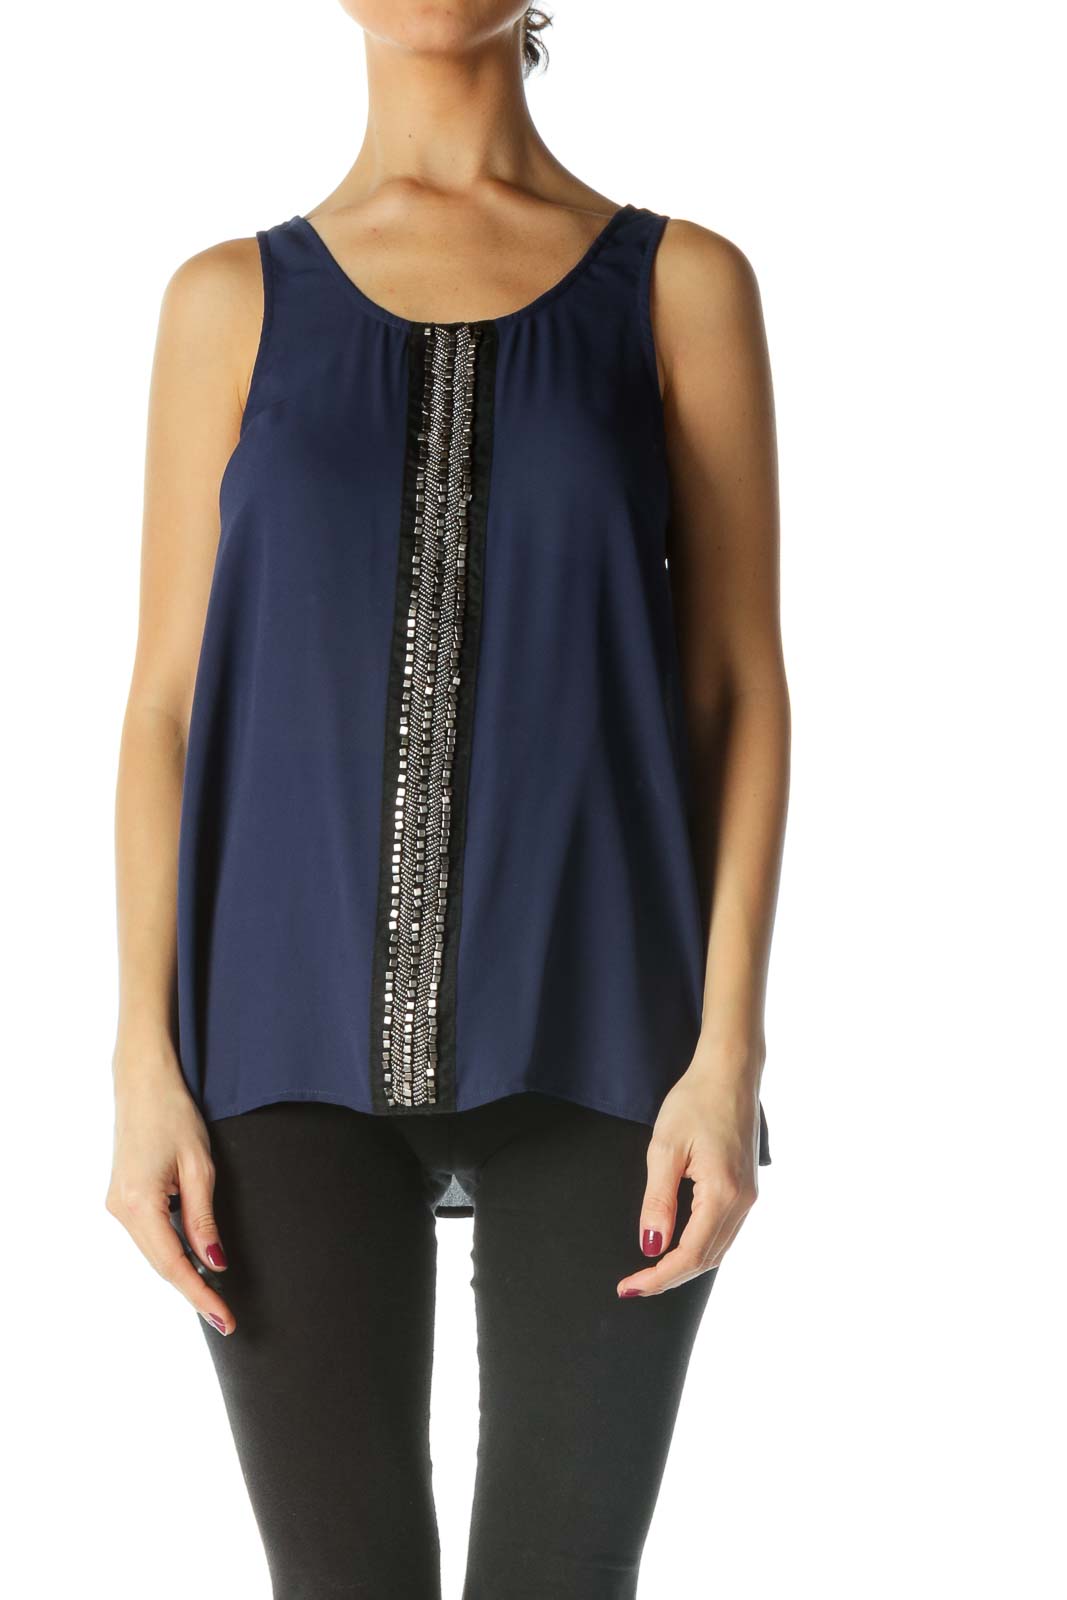 Blue Tank Top with Silver Hardware Front